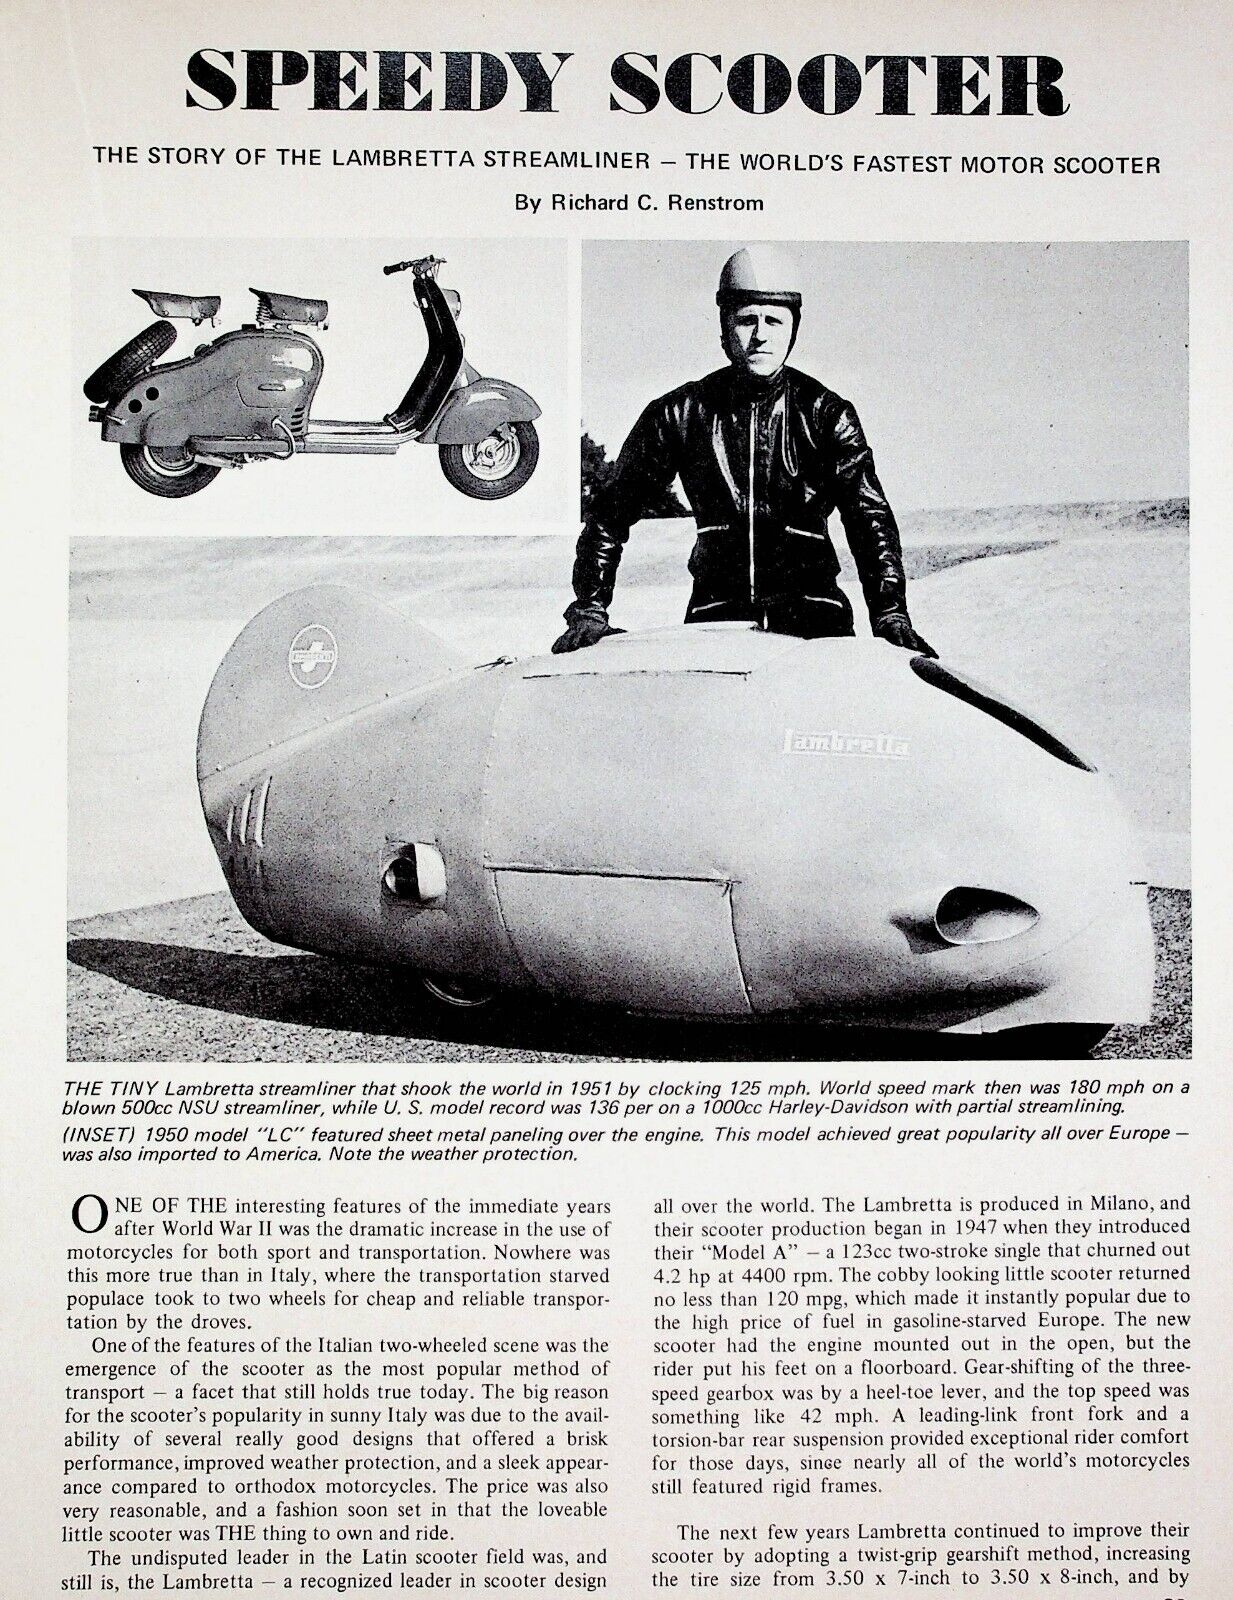 1969 Lambretta Streamliner World\'s Fastest Scooter - 3-Page Vintage Article